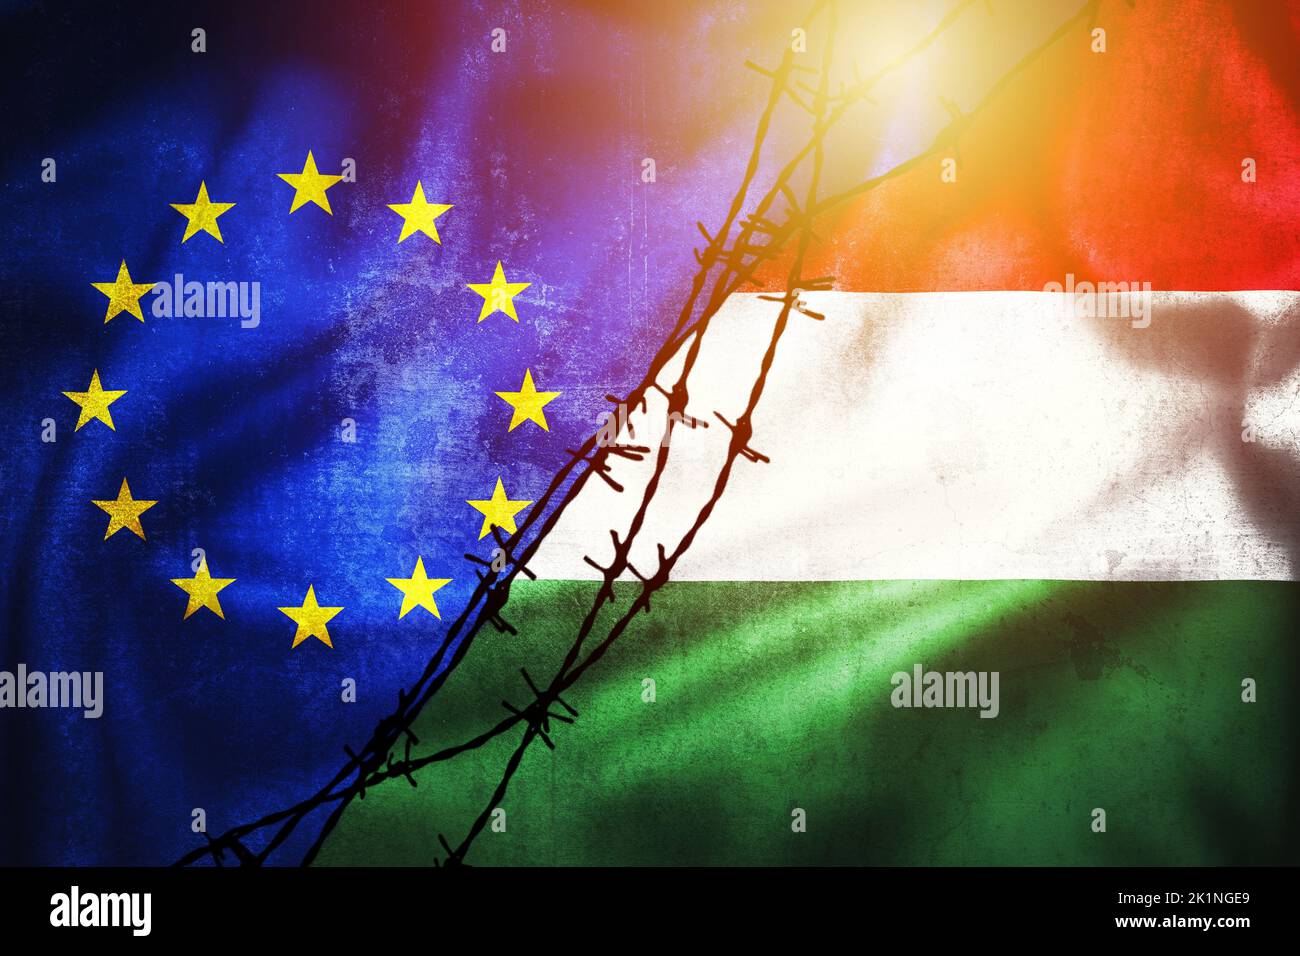 Grunge flags of EU and Hungary divided by barb wire illustration sun haze view, concept of tense relations between and dispute of European union and H Stock Photo